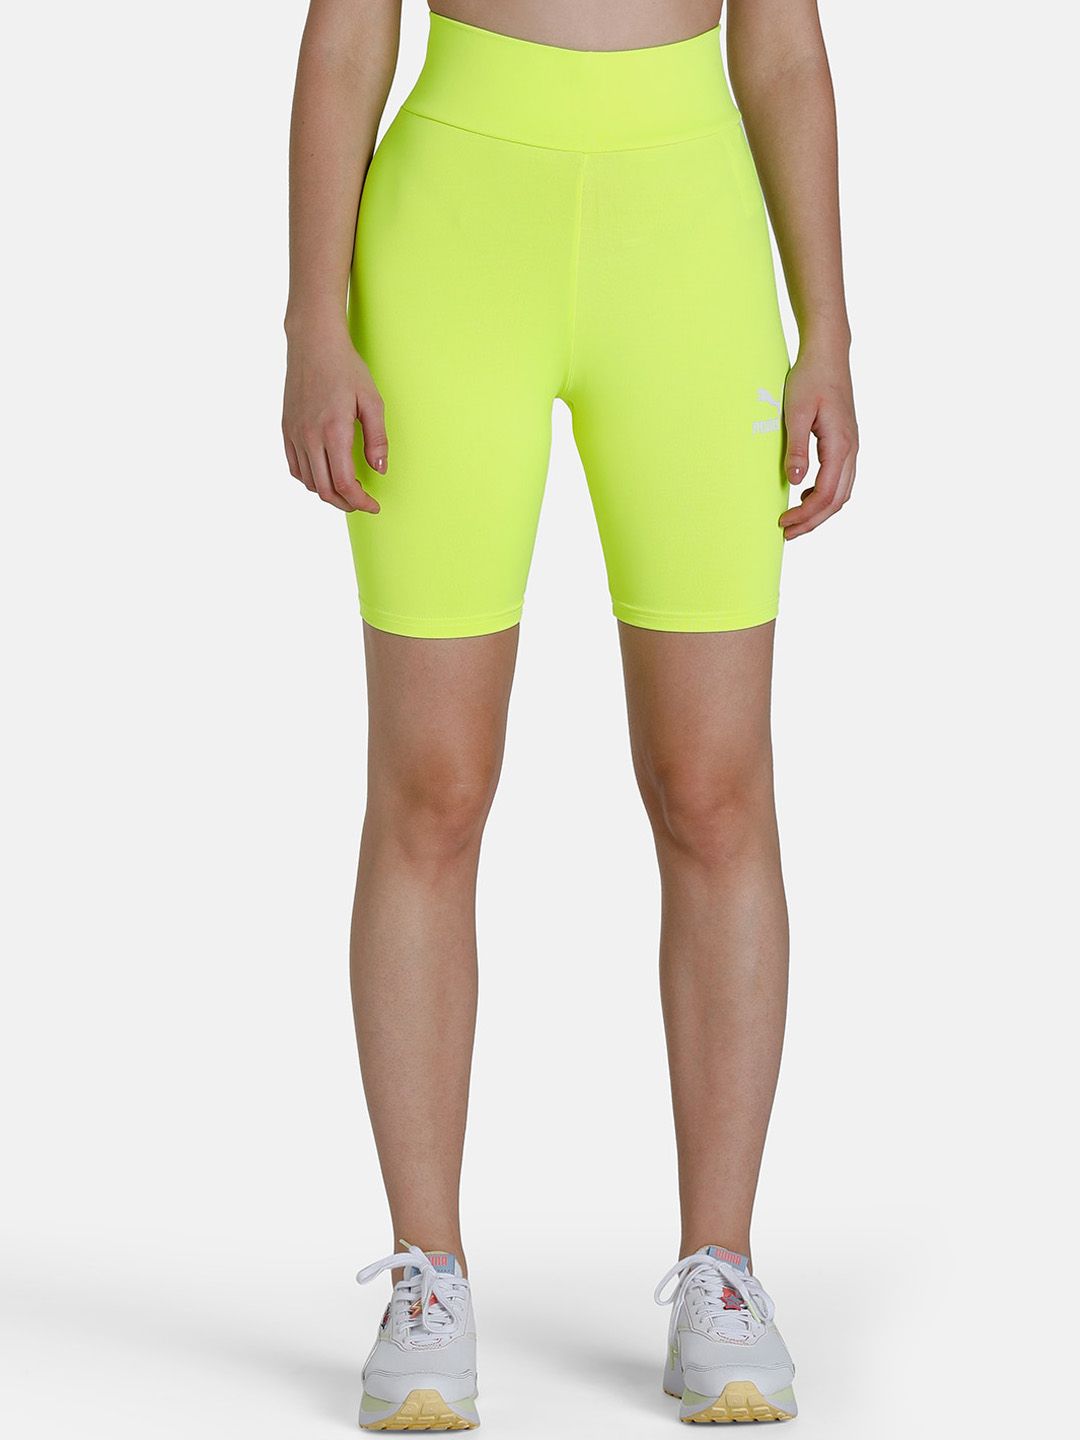 Puma Women Fluorescent Green Slim Fit Summer Squezze Sports Shorts Tights 7" Price in India